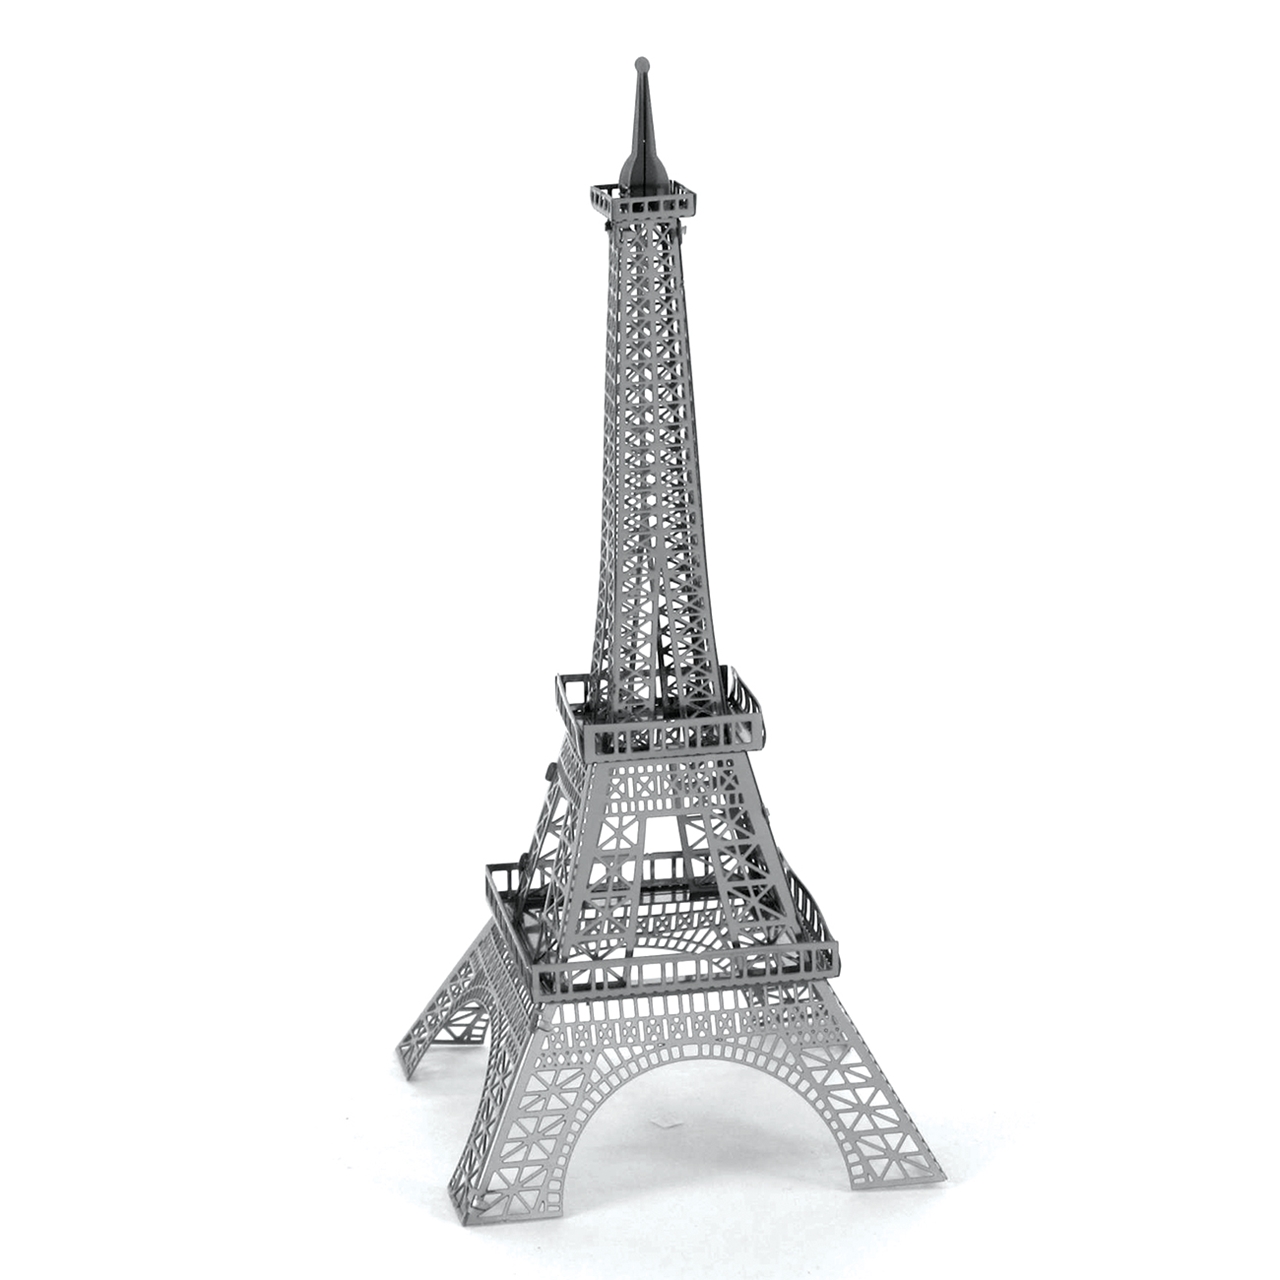 Eiffel Tower With Flowers Sketch Drawn Black Silhouette Illustration Stock  Illustration - Download Image Now - iStock